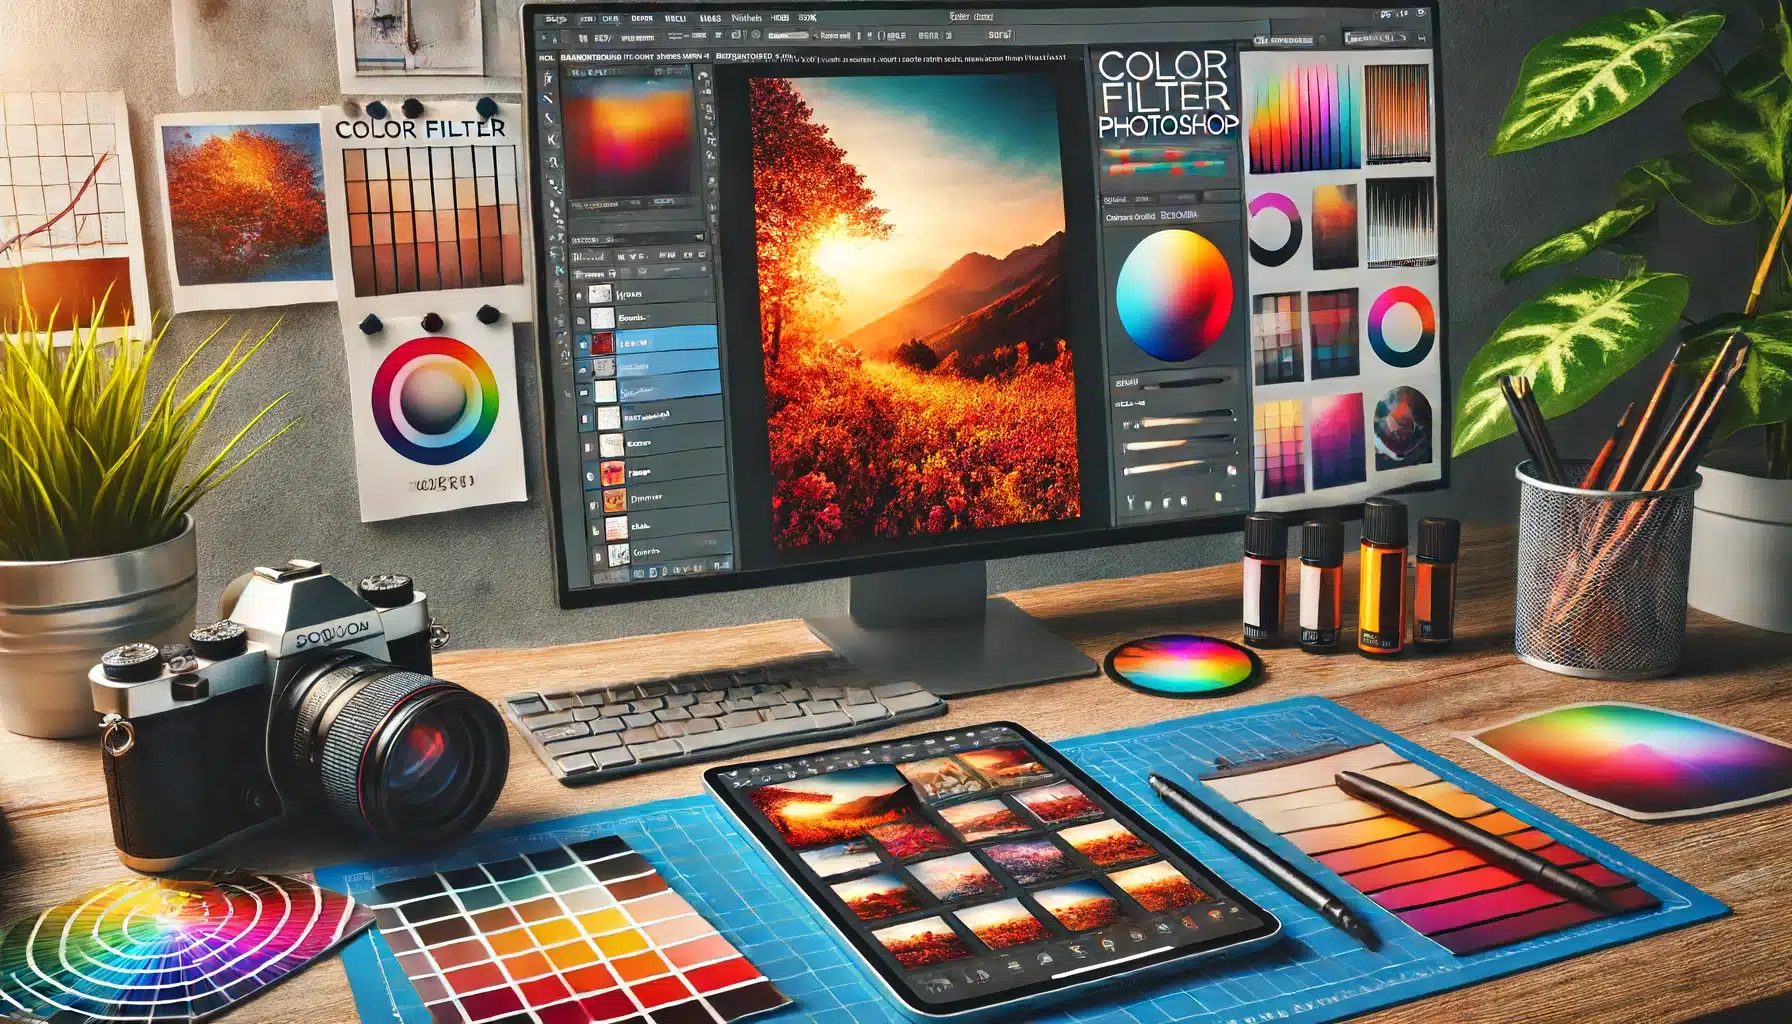 Color Filter Photoshop: Vibrant workspace with a printed landscape photo showing warm and cool color filters, color swatches, a professional digital camera, and detailed photo editing notes.